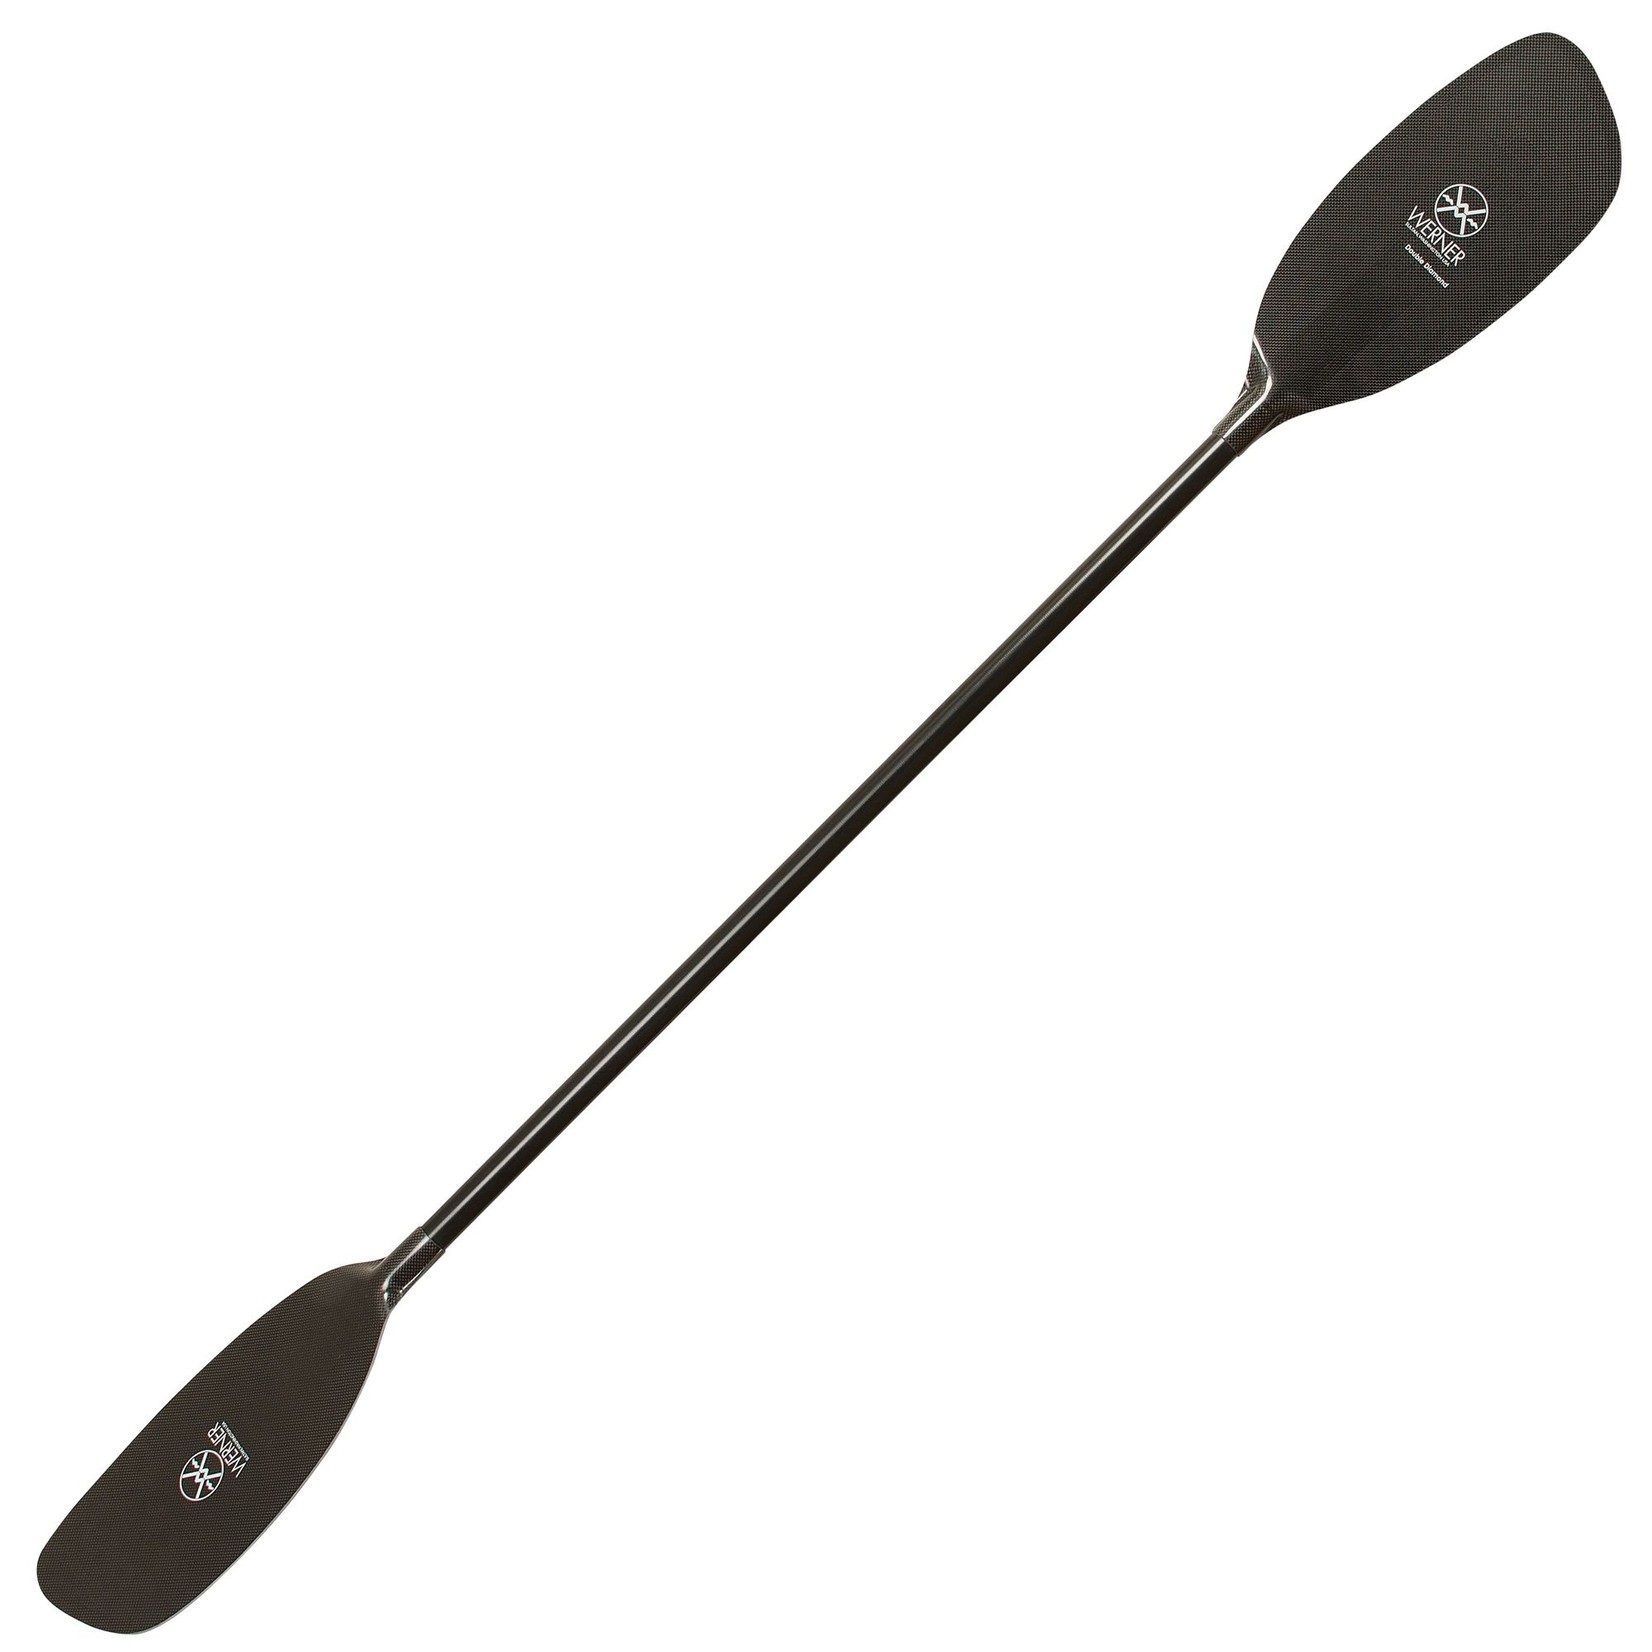 Werner Werner Double Diamond Carbon Paddle